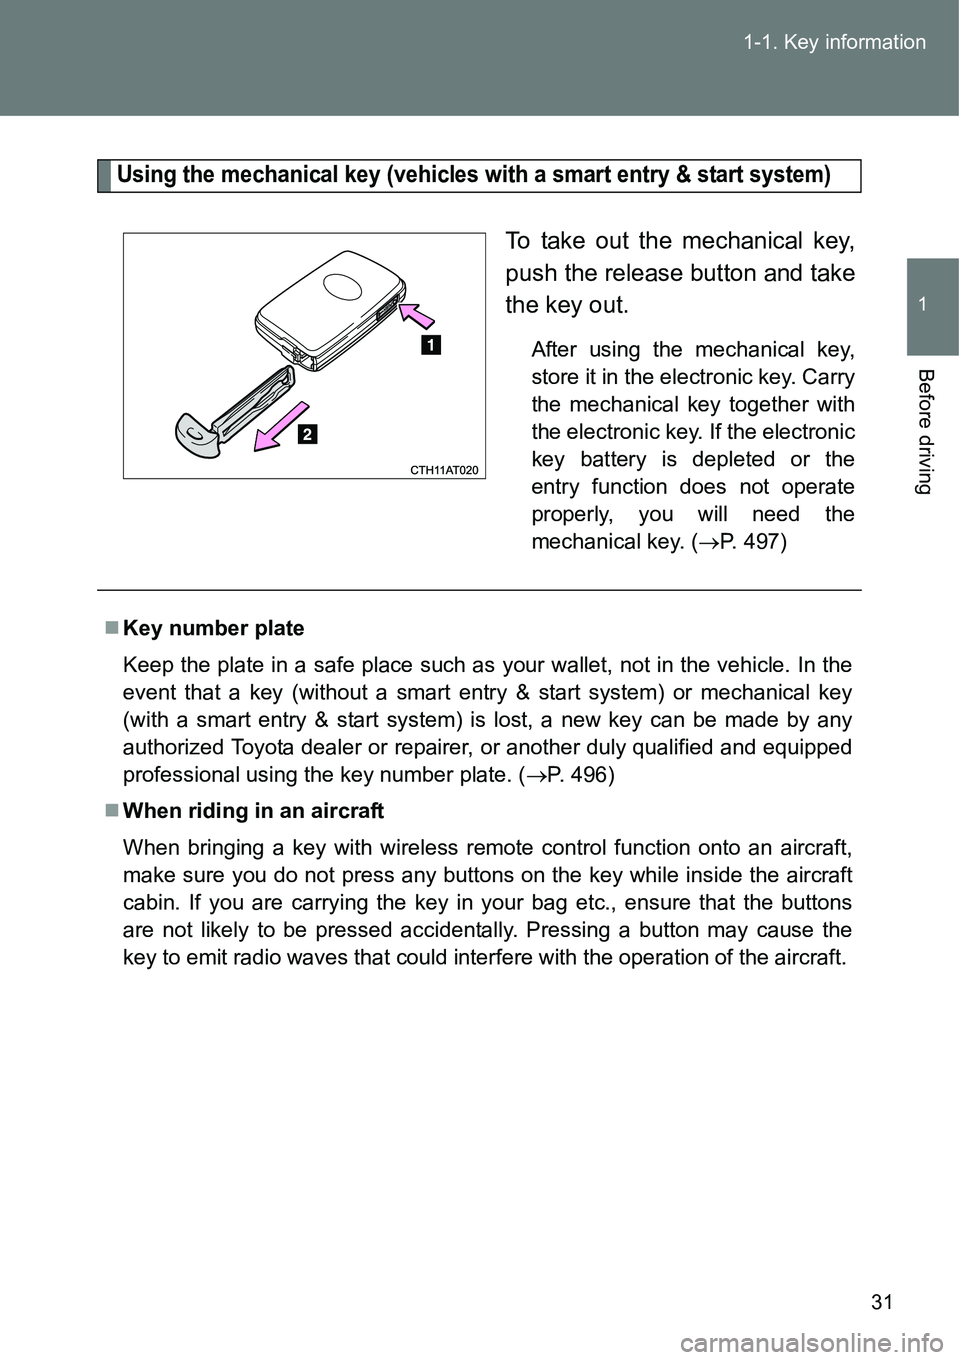 TOYOTA VERSO S 2015  Owners Manual 31 1-1. Key information
1
Before driving
Using the mechanical key (vehicles with a smart entry & start system)
To take out the mechanical key,
push the release button and take
the key out.
After using